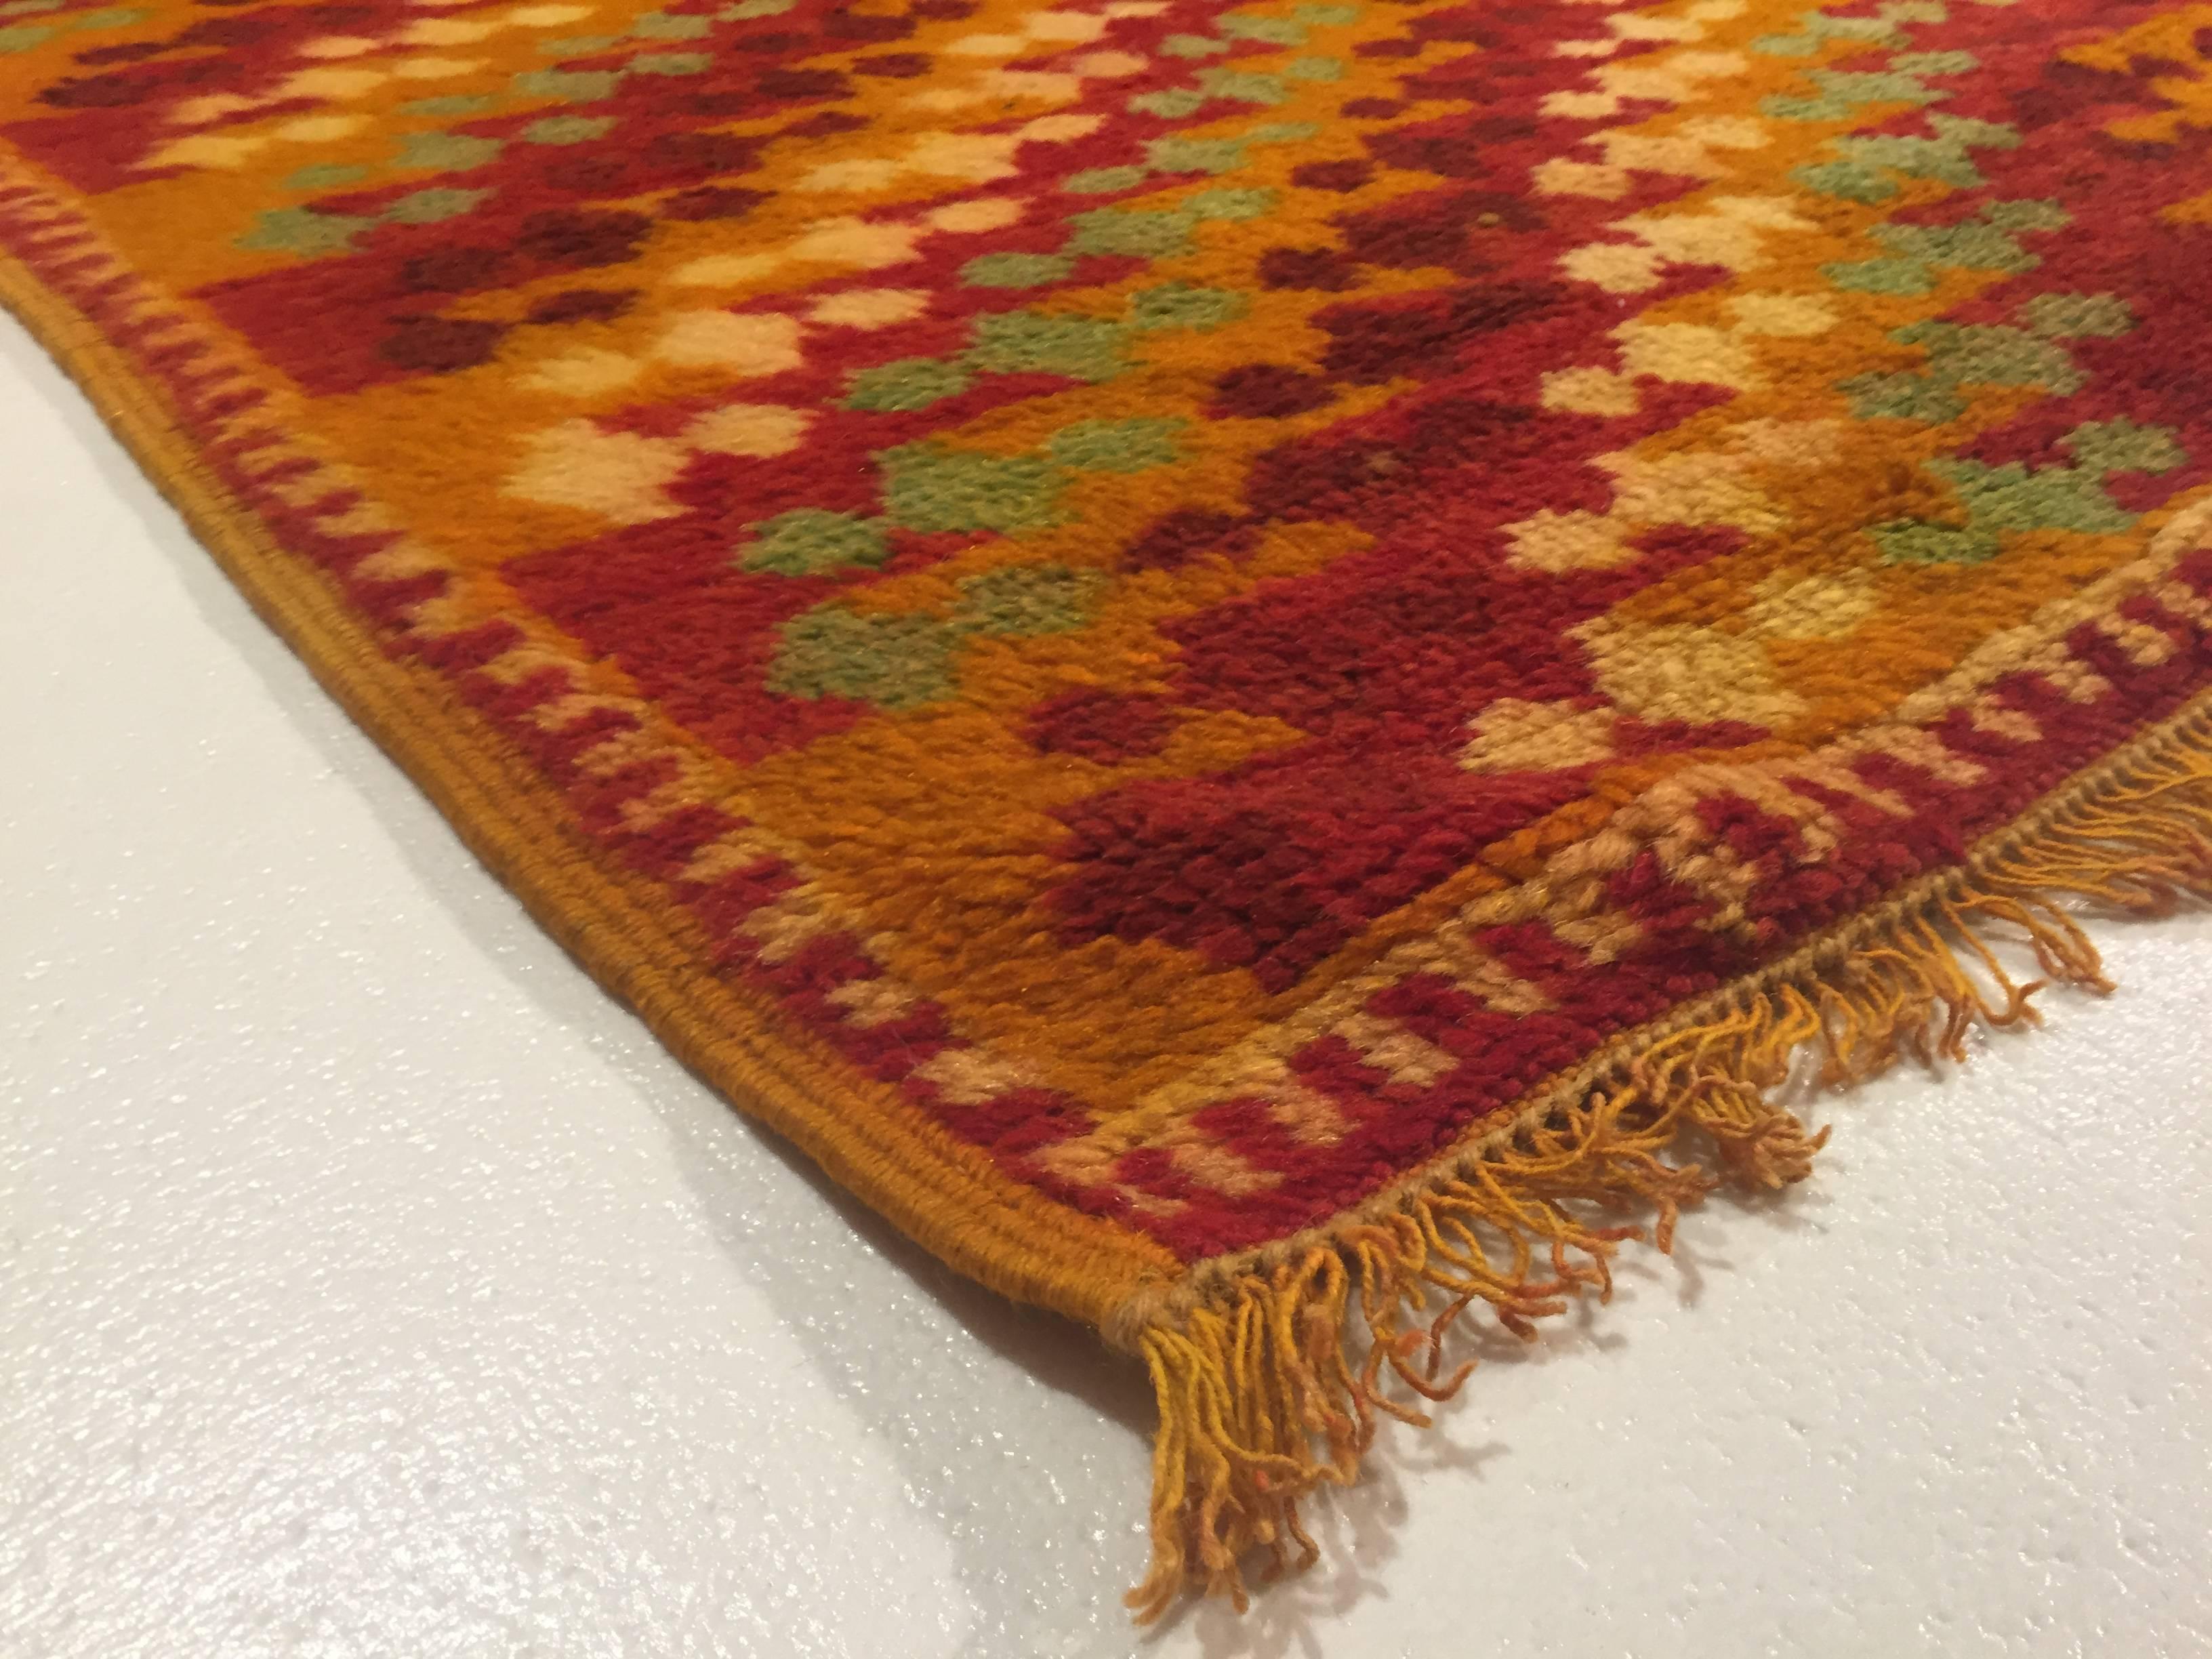 1970 Berber Tribal Moroccan Hand-Knotted Rug Yellow Red Long and Narrow For Sale 2